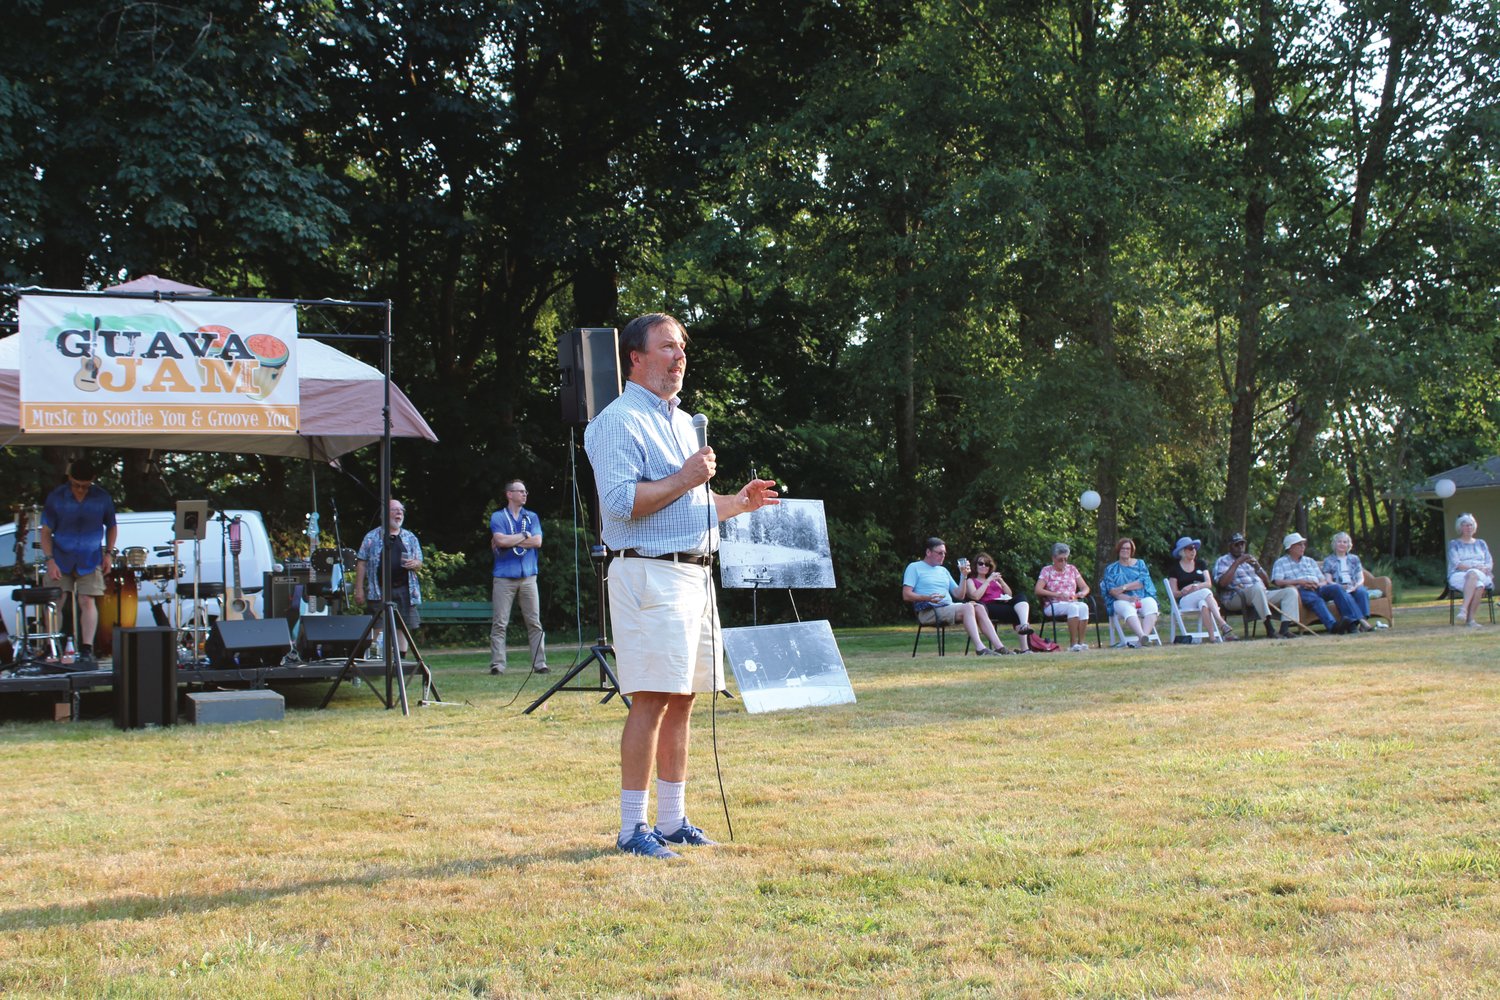 Board Member J. Vander Stoep addresses the crowd at the Chehalis Foundation's Party in the Park fundraiser for Lintott-Alexander Park. Behind him are historic photos of the park, which was deeded to the City of Chehalis in the early 1900s, that the Chehalis Foundation board was given by the Lewis County Historical Museum.